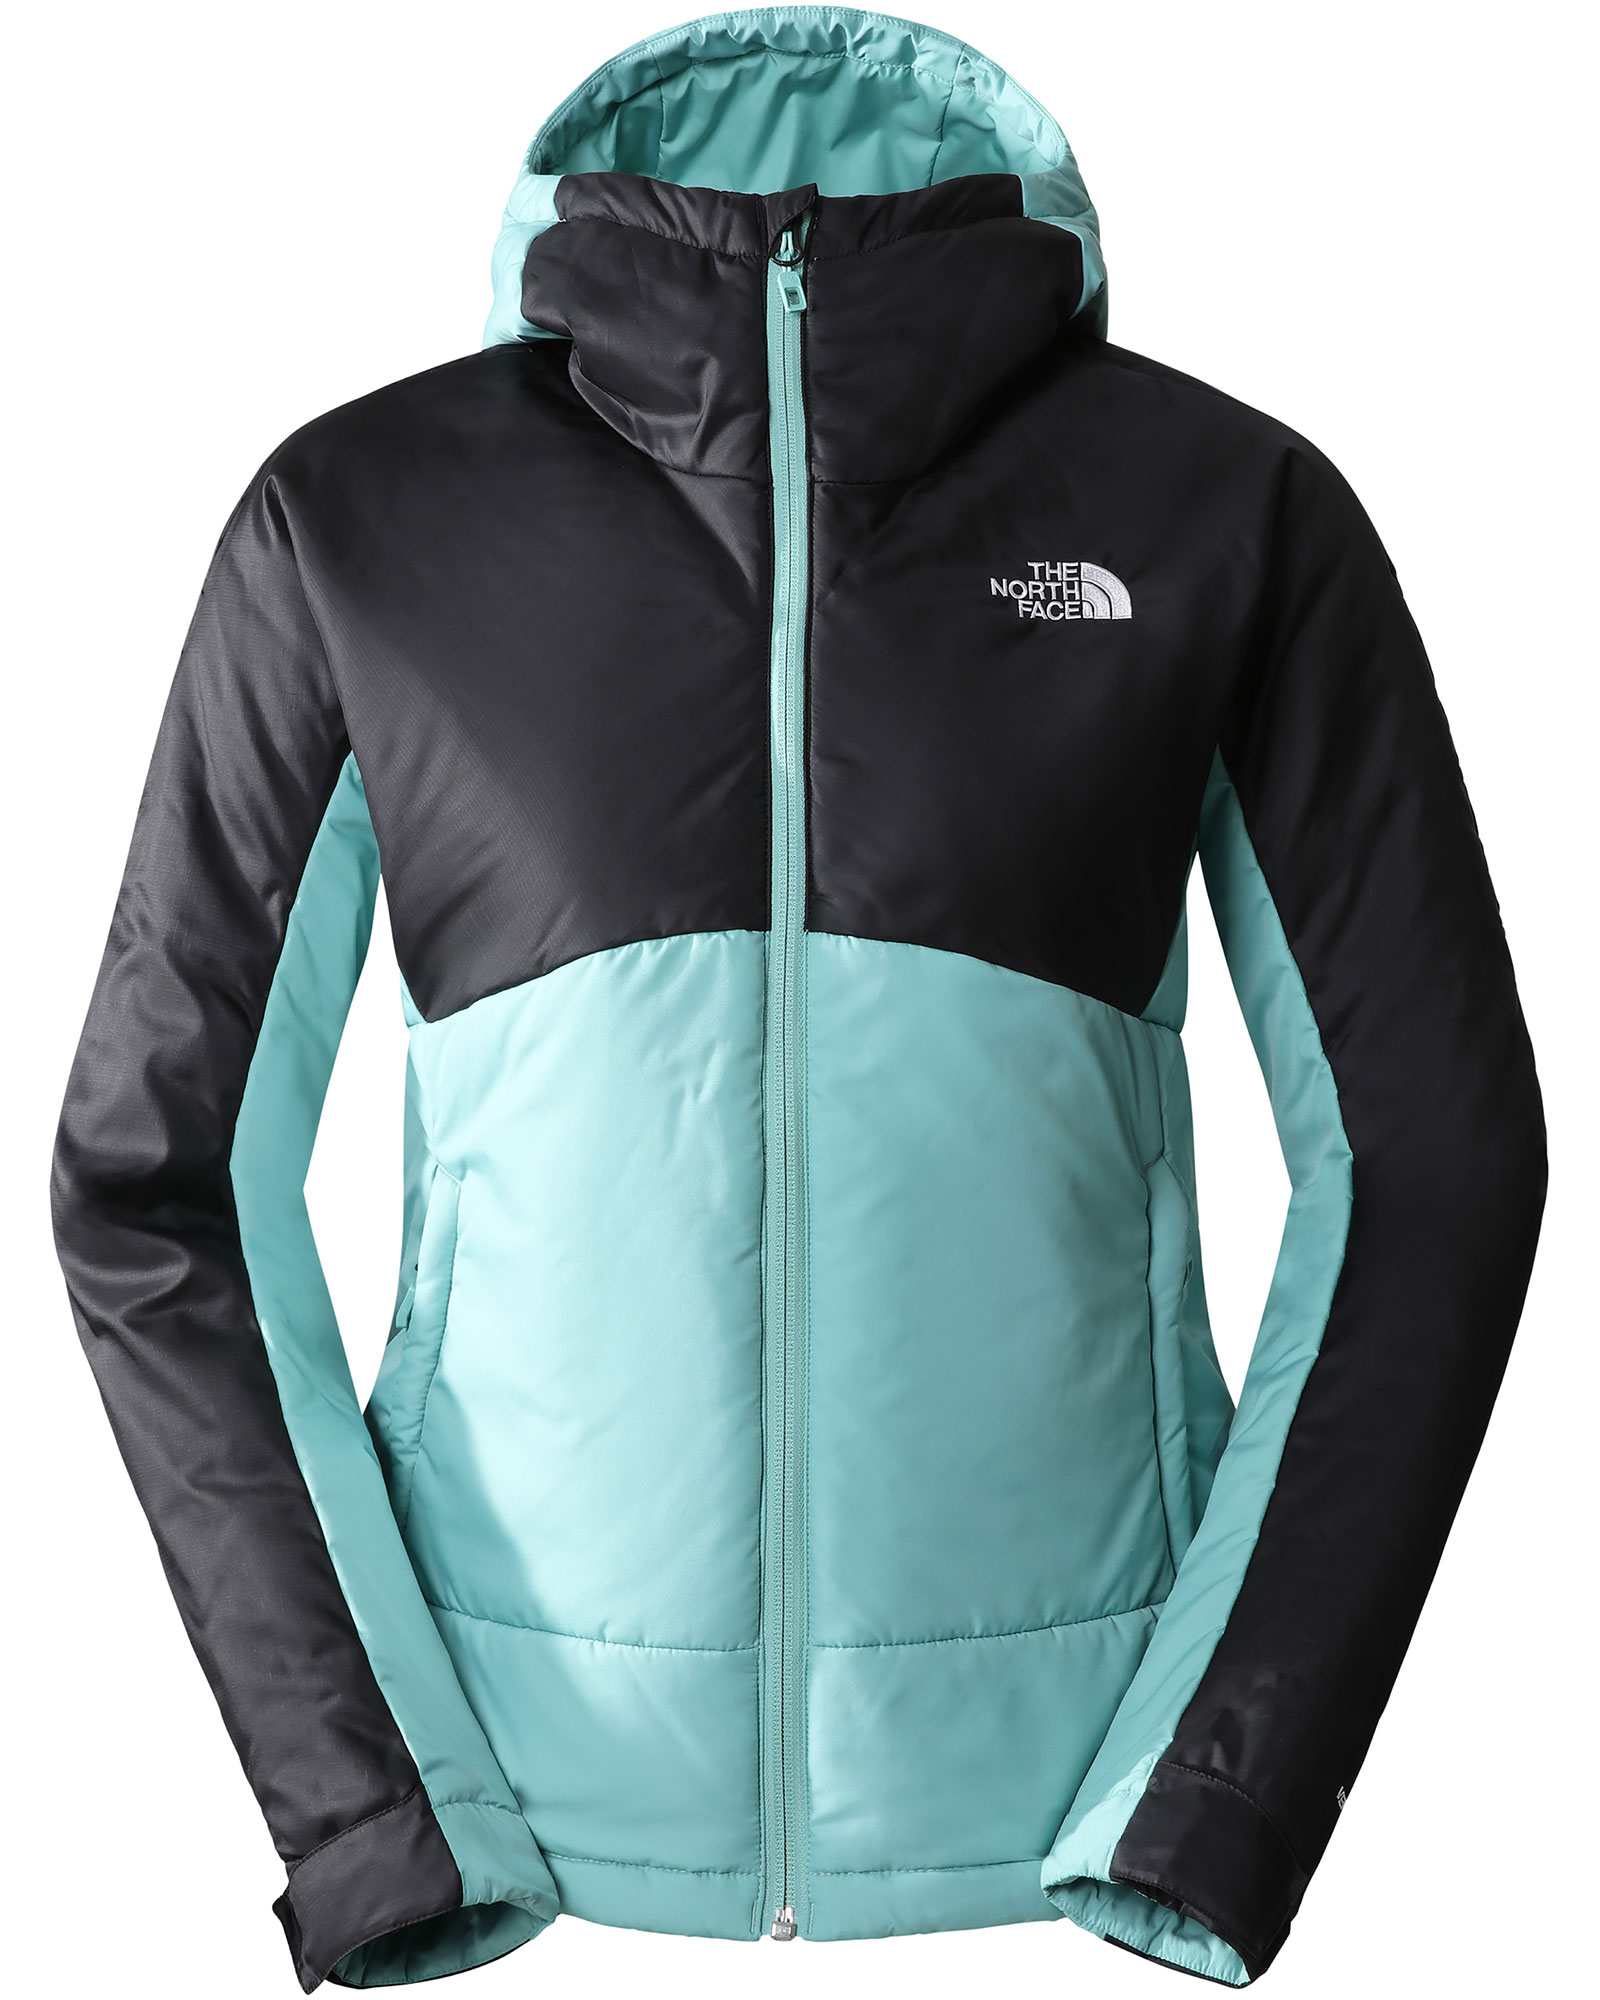 The North Face Circular Hybrid Women’s Insulated Jacket - Wasabi S